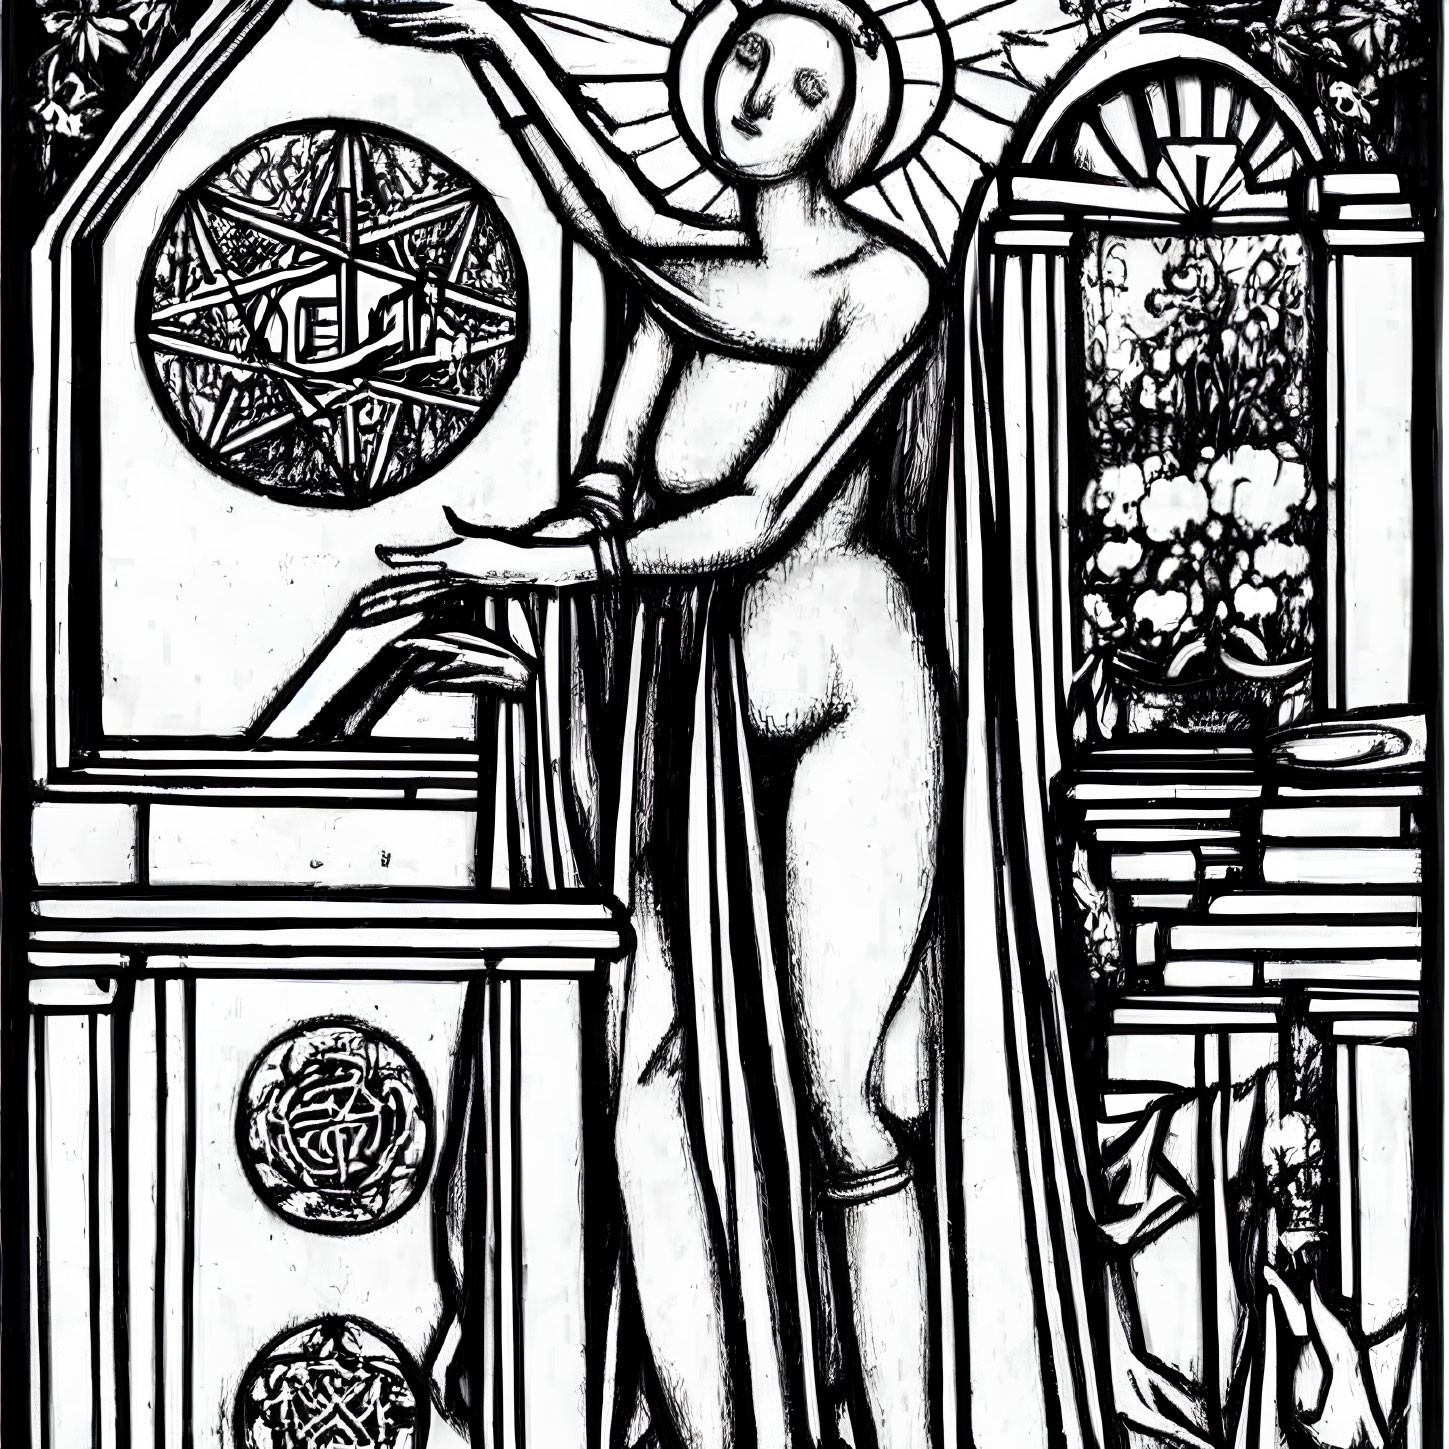 Monochrome line art of haloed figure in stained glass window design